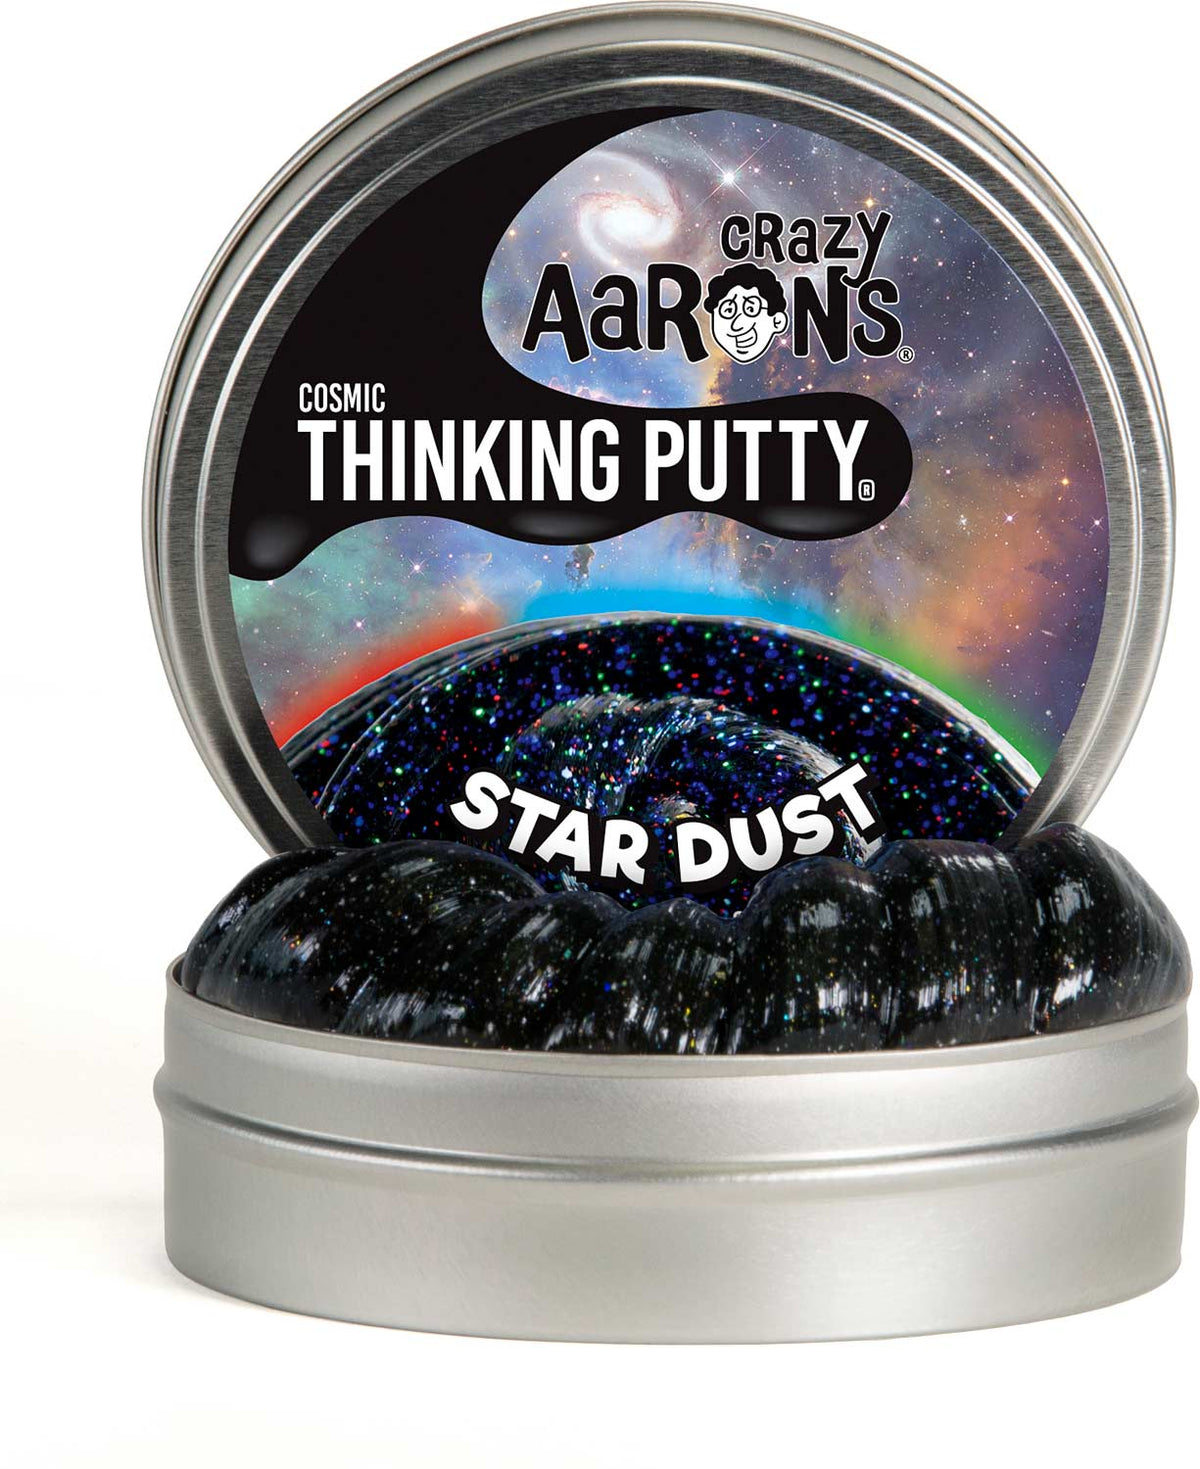 Crazy Aarons: Thinking Putty - Cosmic Glows Star Dust